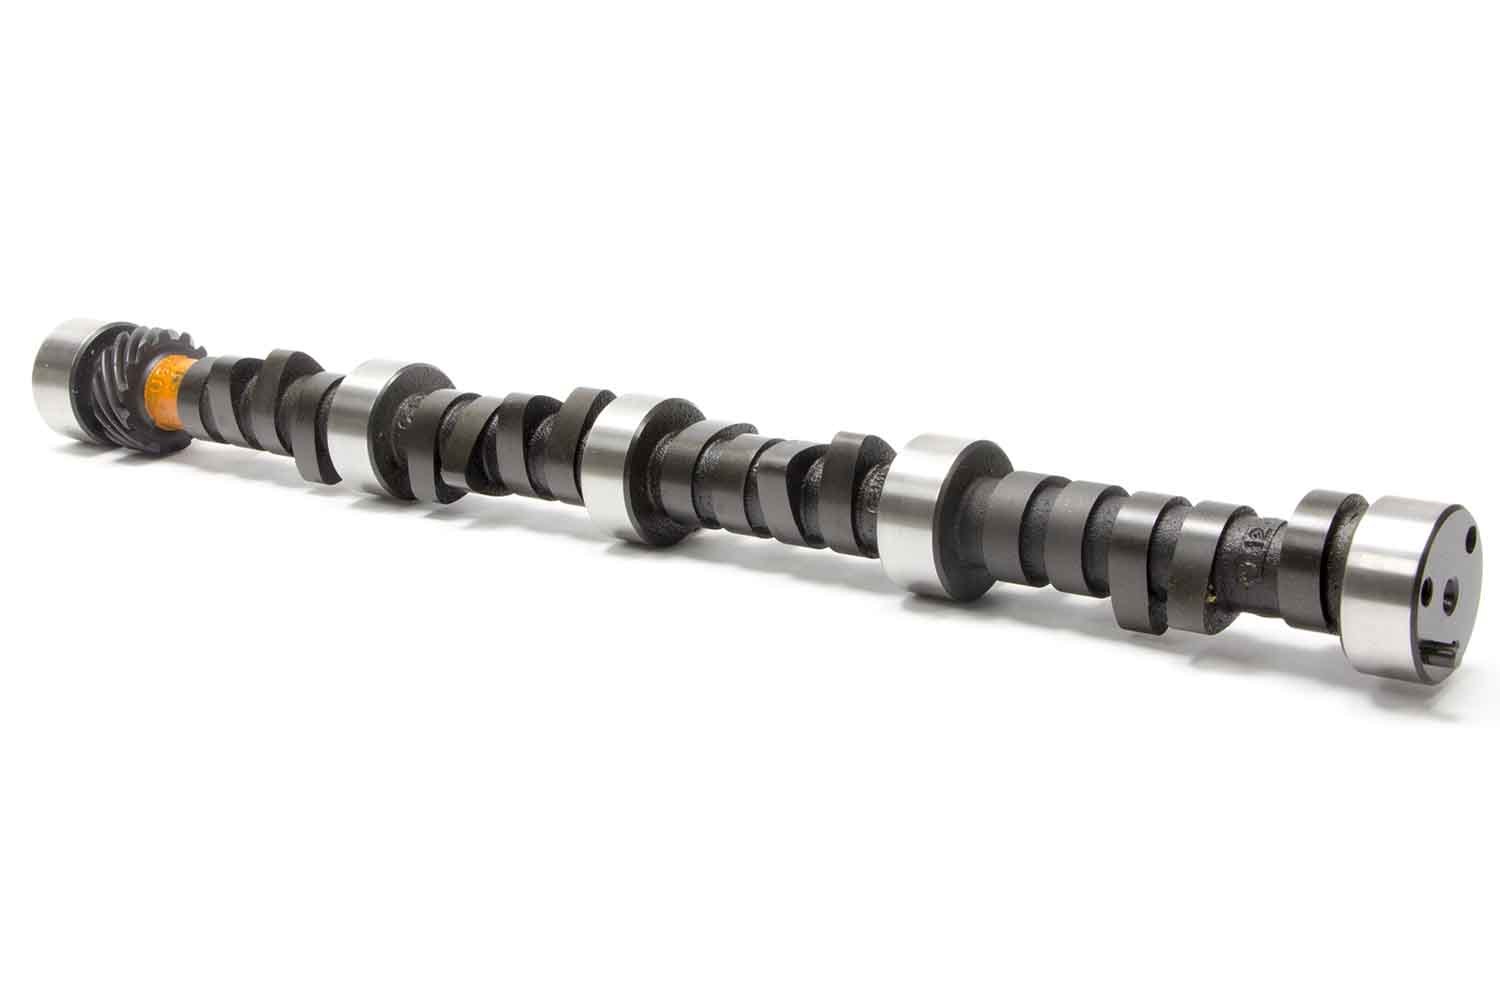 GM Performance, Camshaft,  Hydraulic Flat Tappet,  Lift 0.450/0.460 in,  Duration 212/222,  112.5 LSA,  Small Block Chevy,  Ea